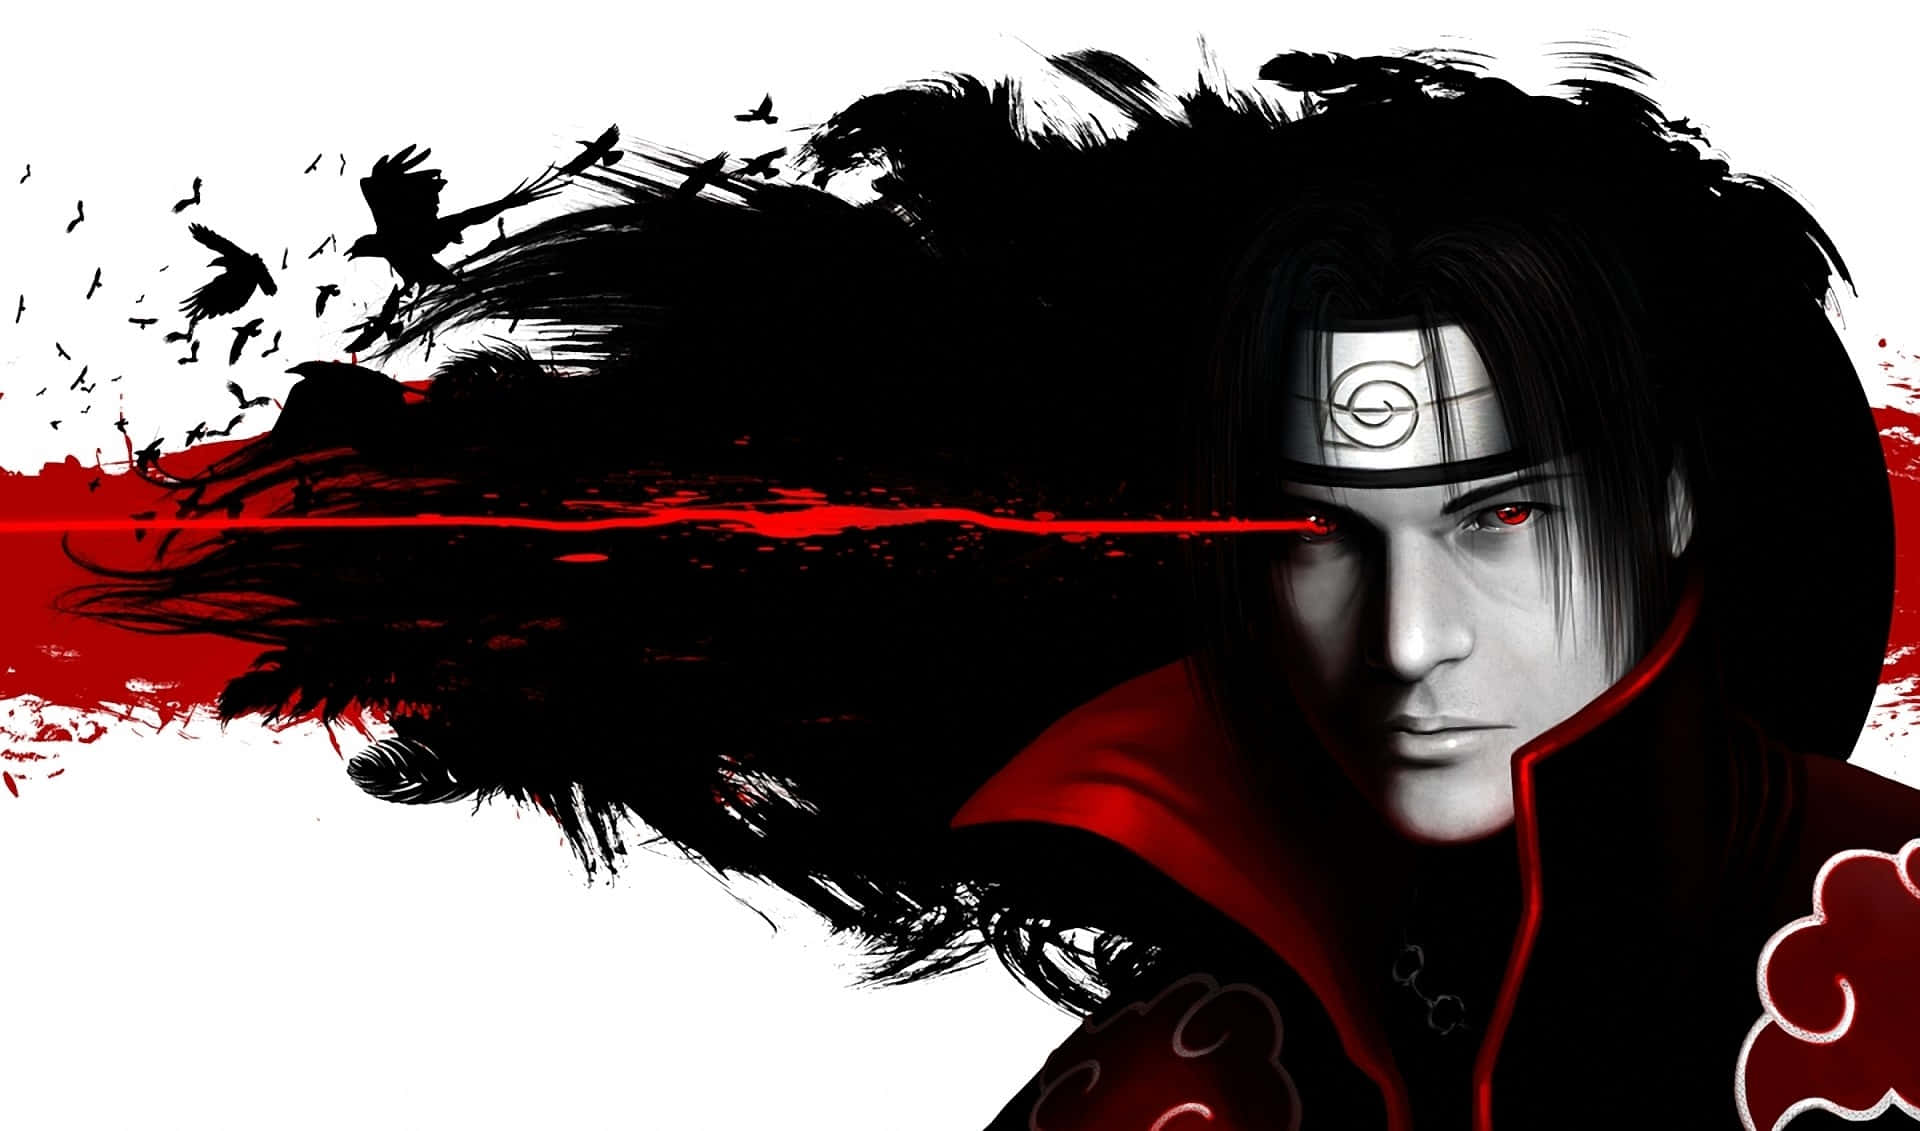 Join the Akatsuki to Conquer the World